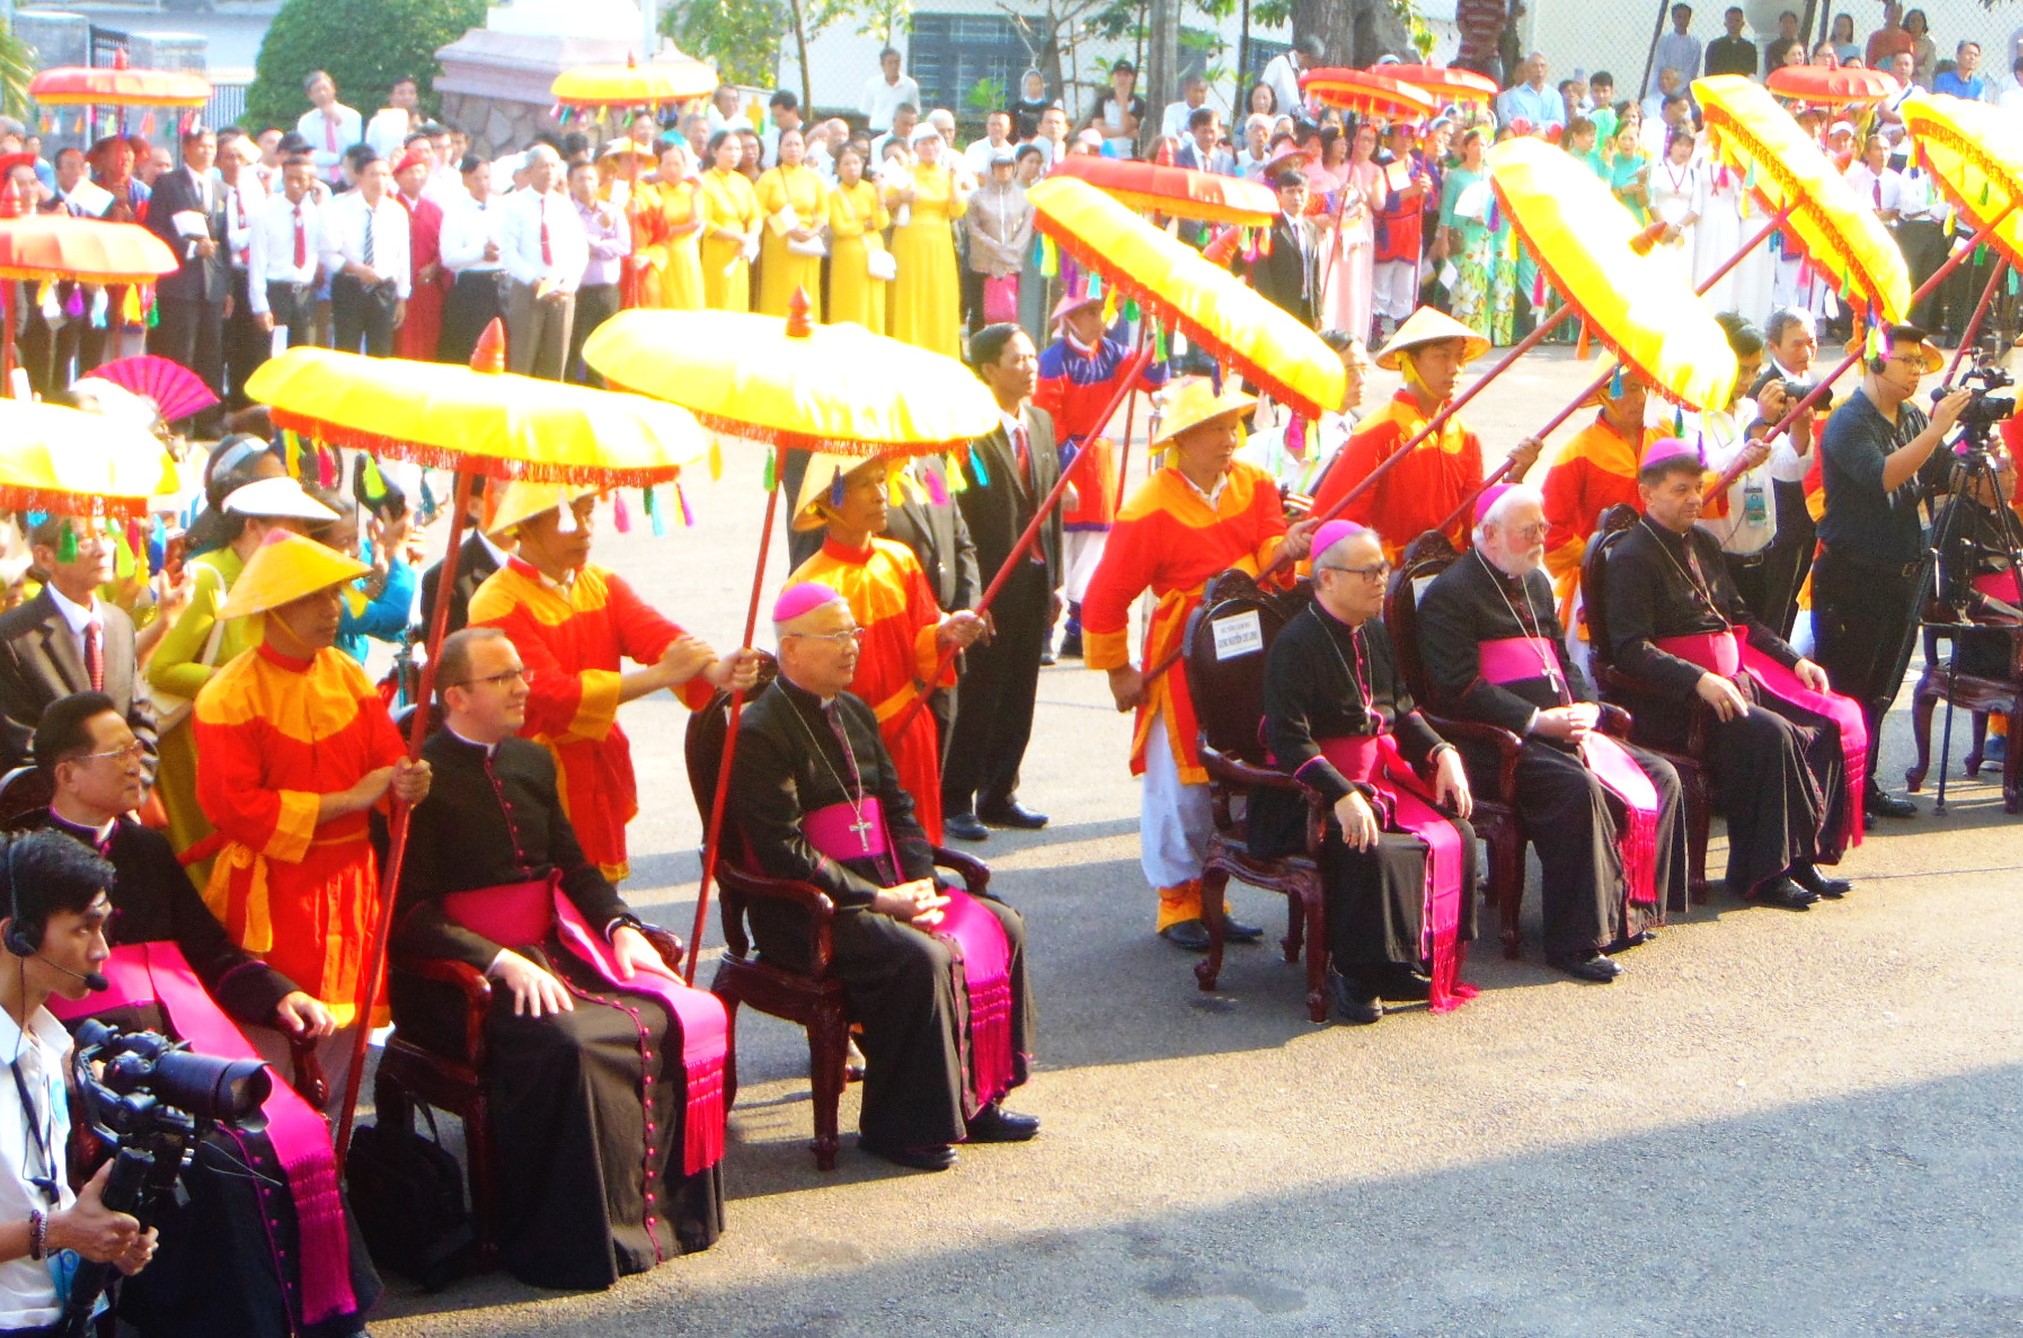 Archbishop Paul Gallagher, the Vatican's foreign minister, joined local bishops to watch a cultural performance in front of Phu Cam Cathedral in Hue on April 12. 